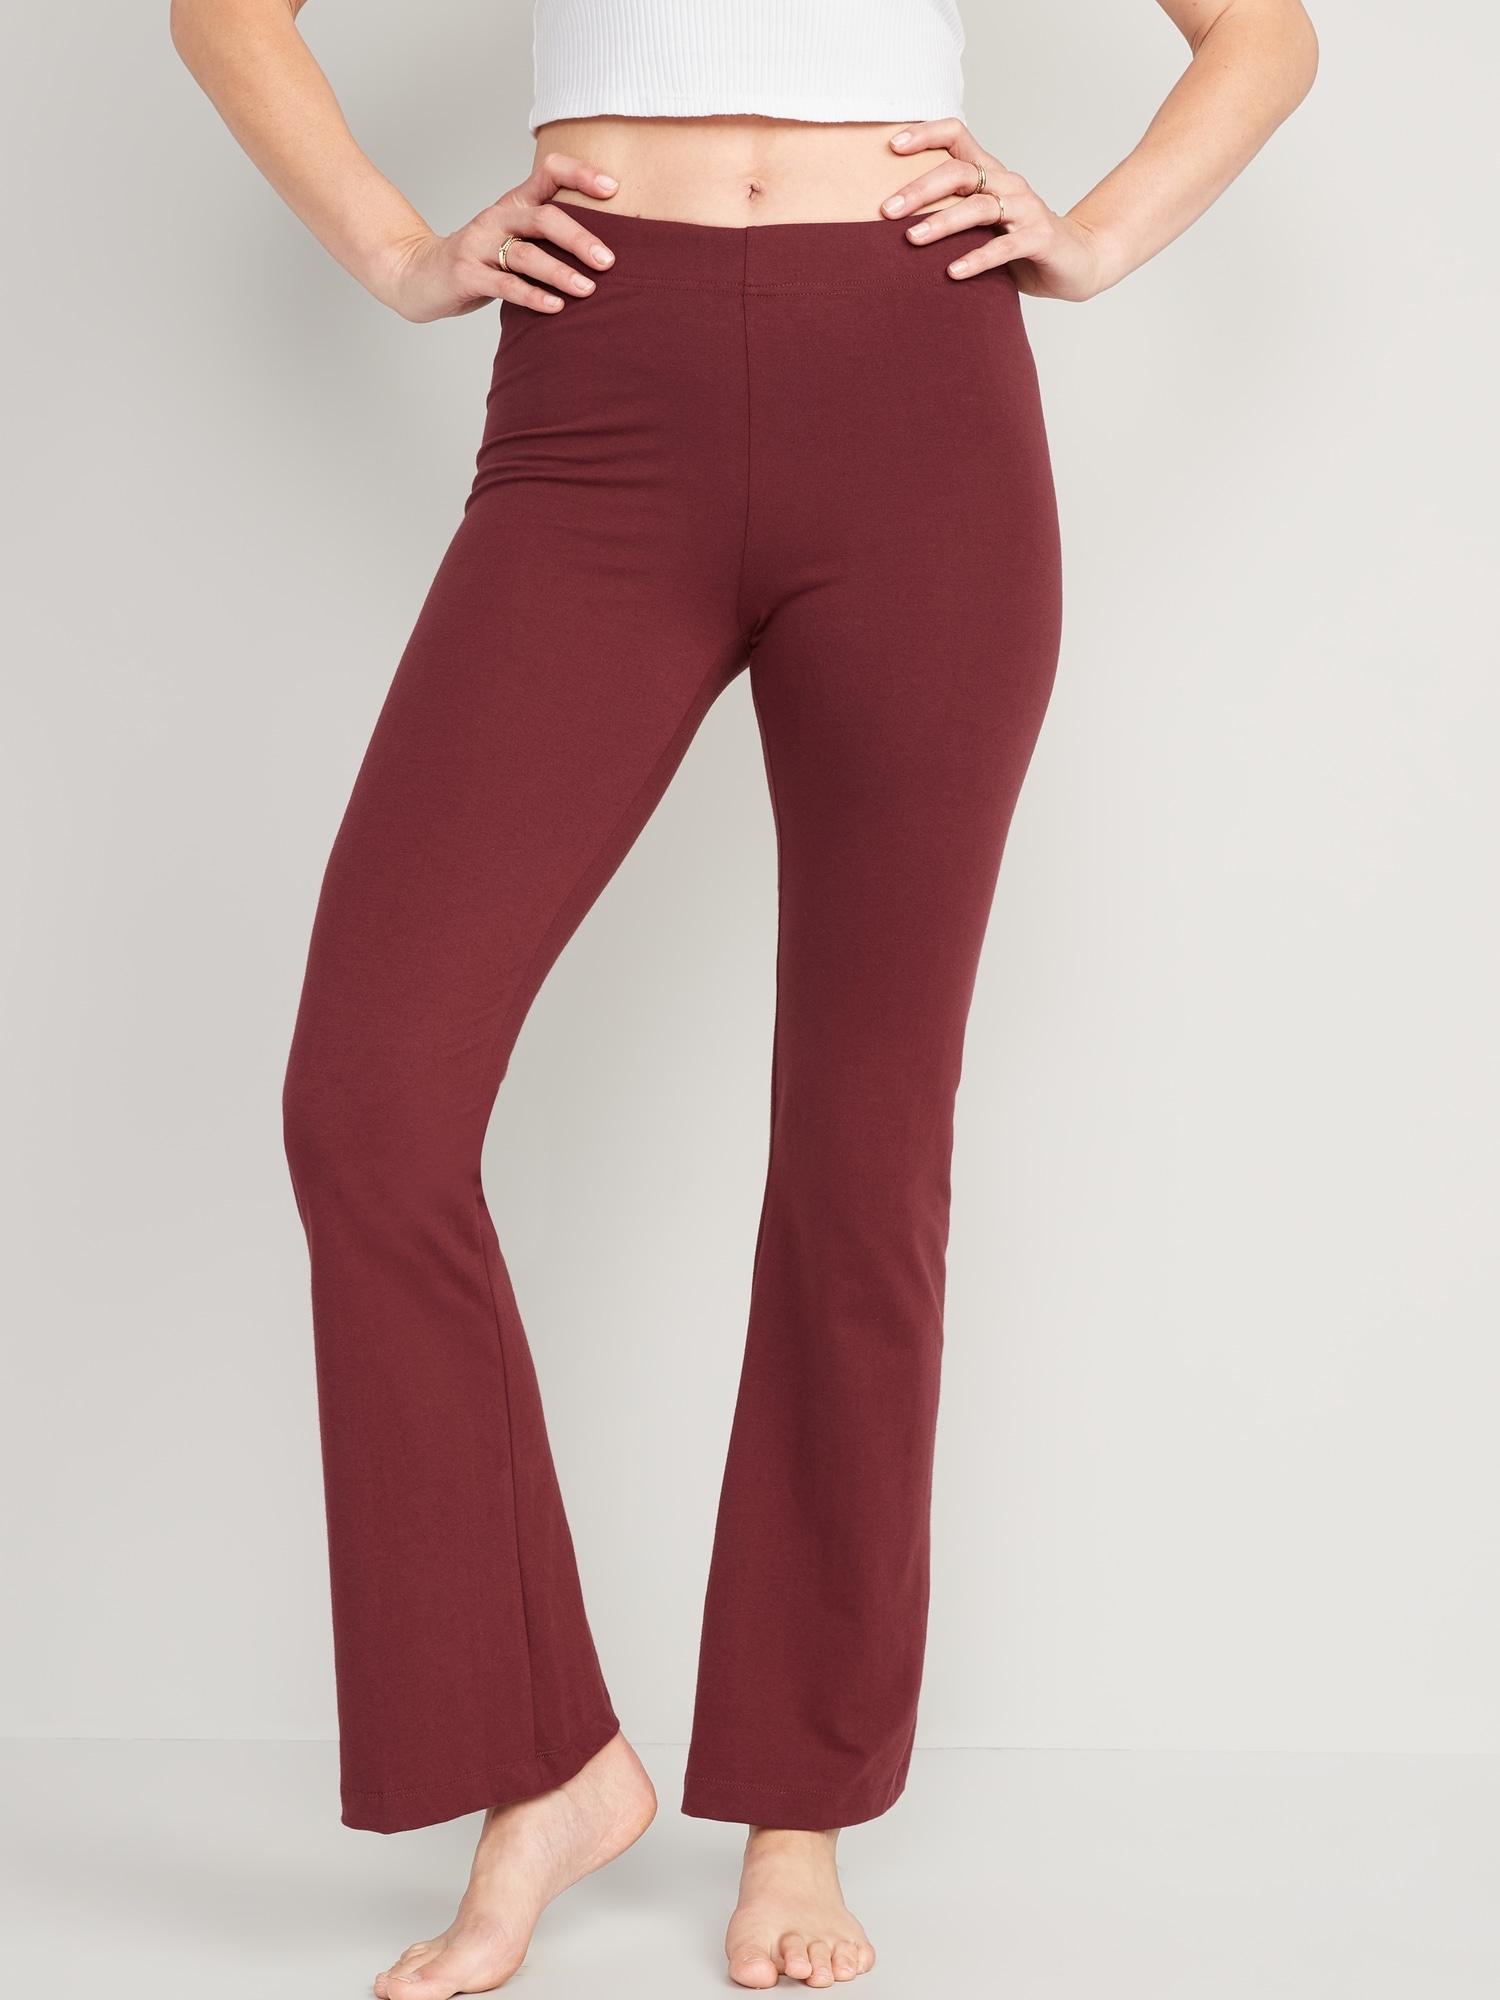 Old Navy Flared Athletic Pants for Women